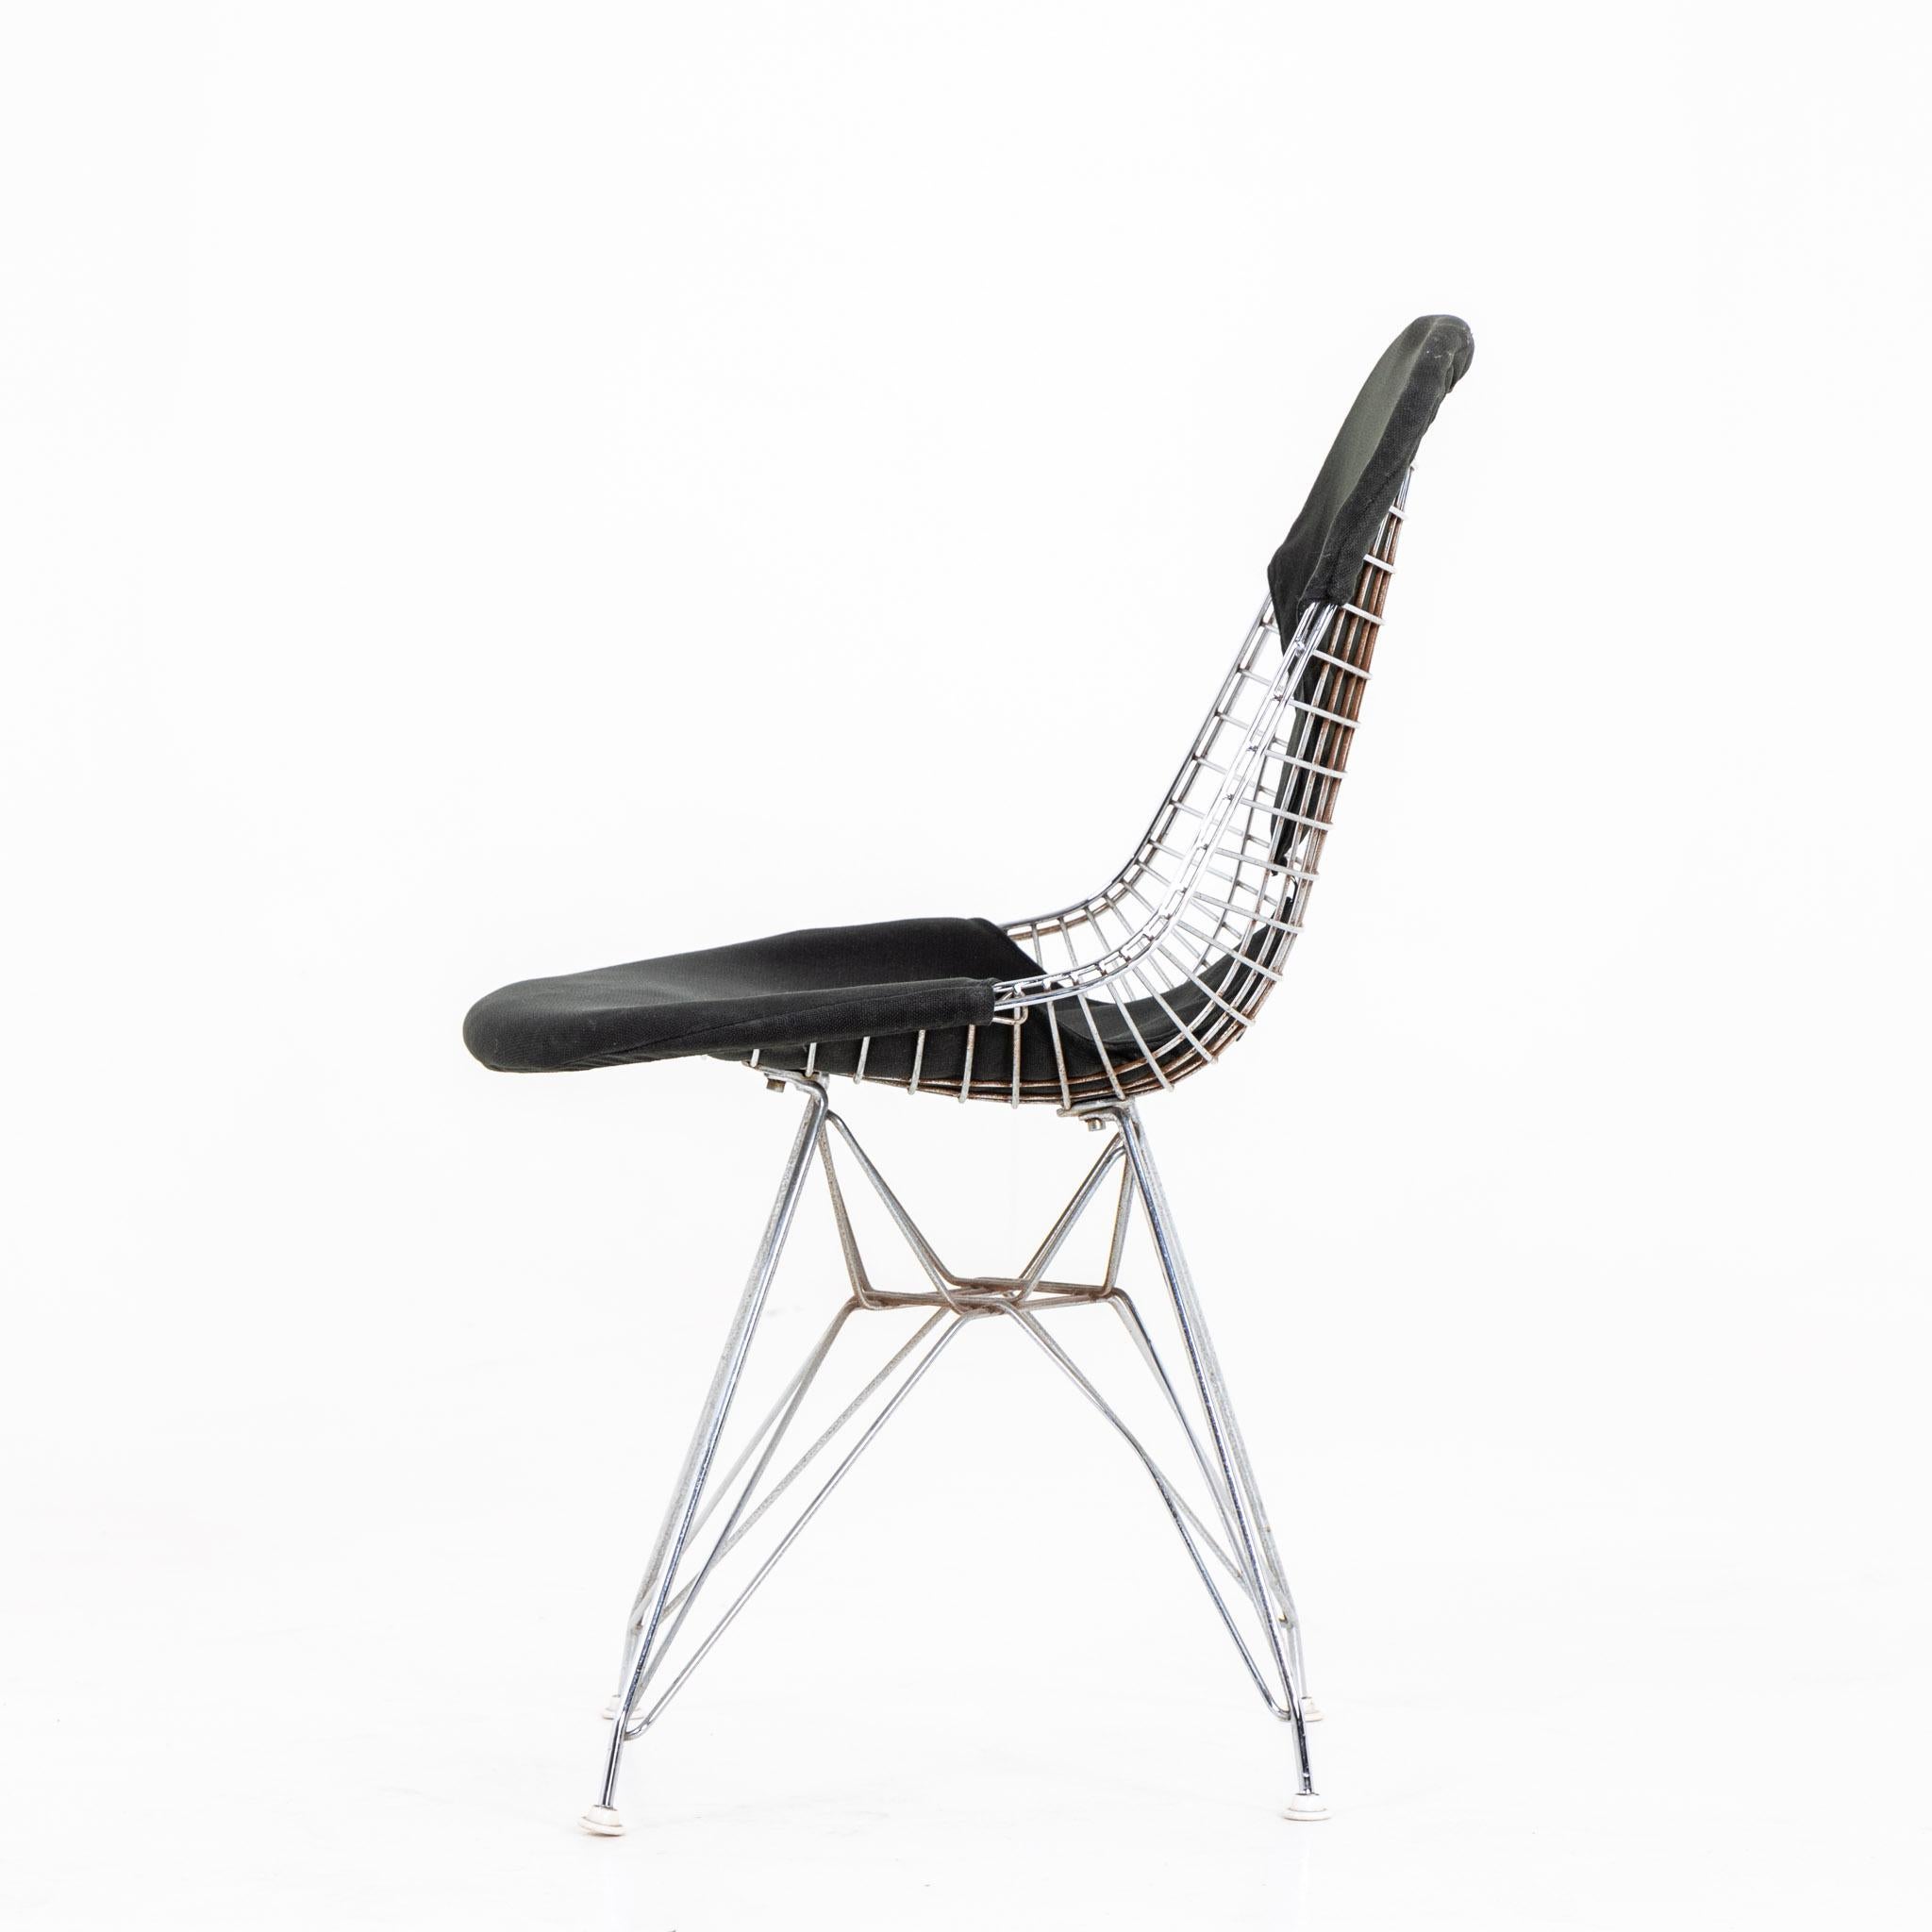 Eames Wire Bikini Chair DKR-2 with Black Cover, Design 1951 For Sale 3